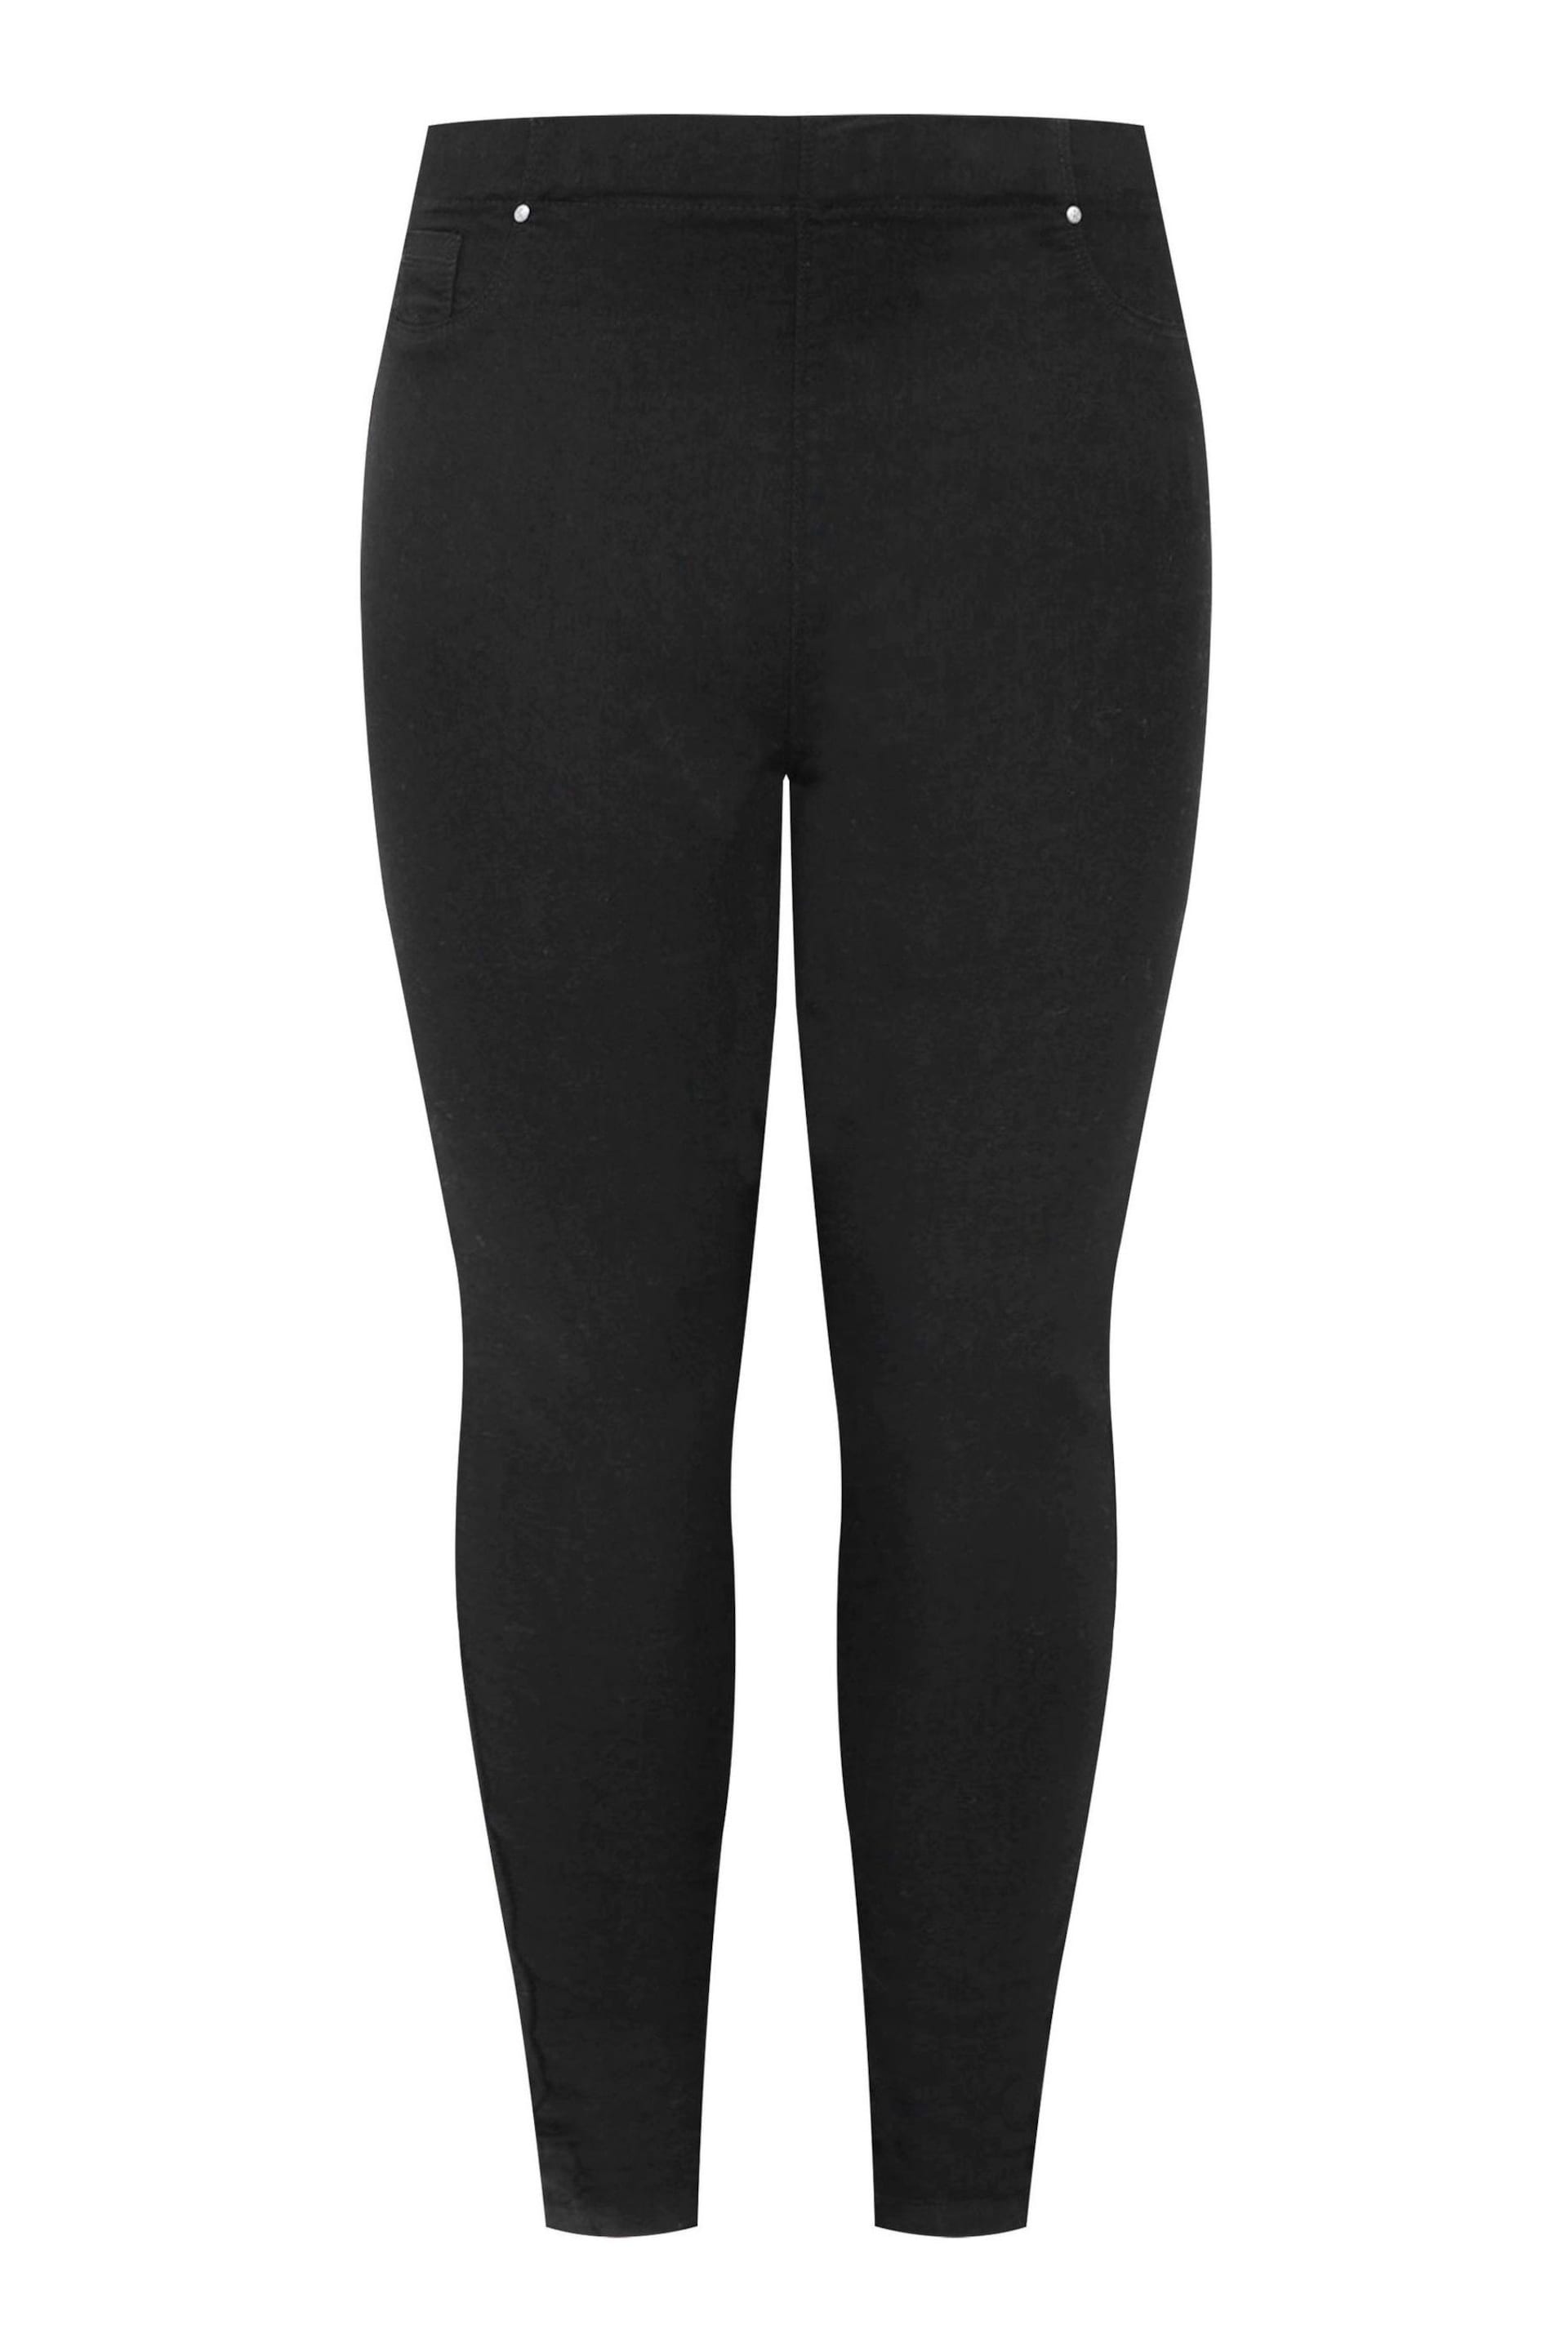 Yours Curve Black Stretch Pull On Jenny Jeggings - Image 5 of 5